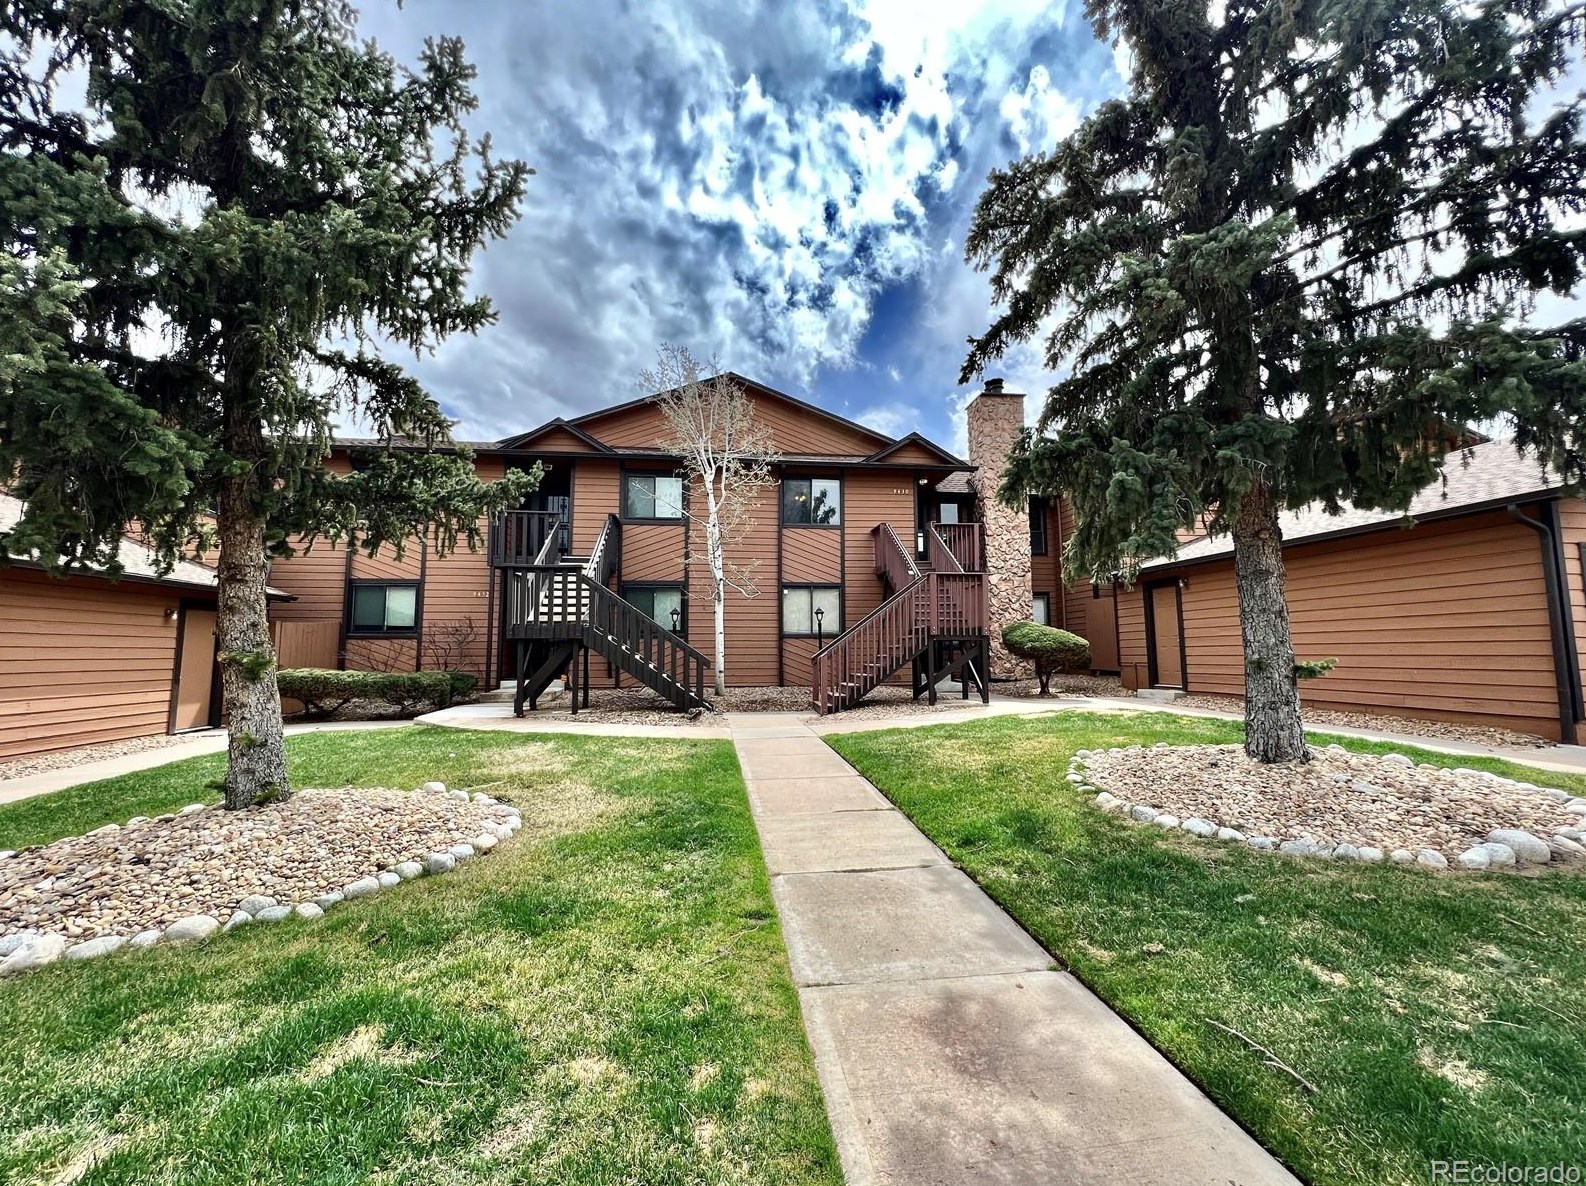 9430 W 89th Cir, Westminster, CO 80021